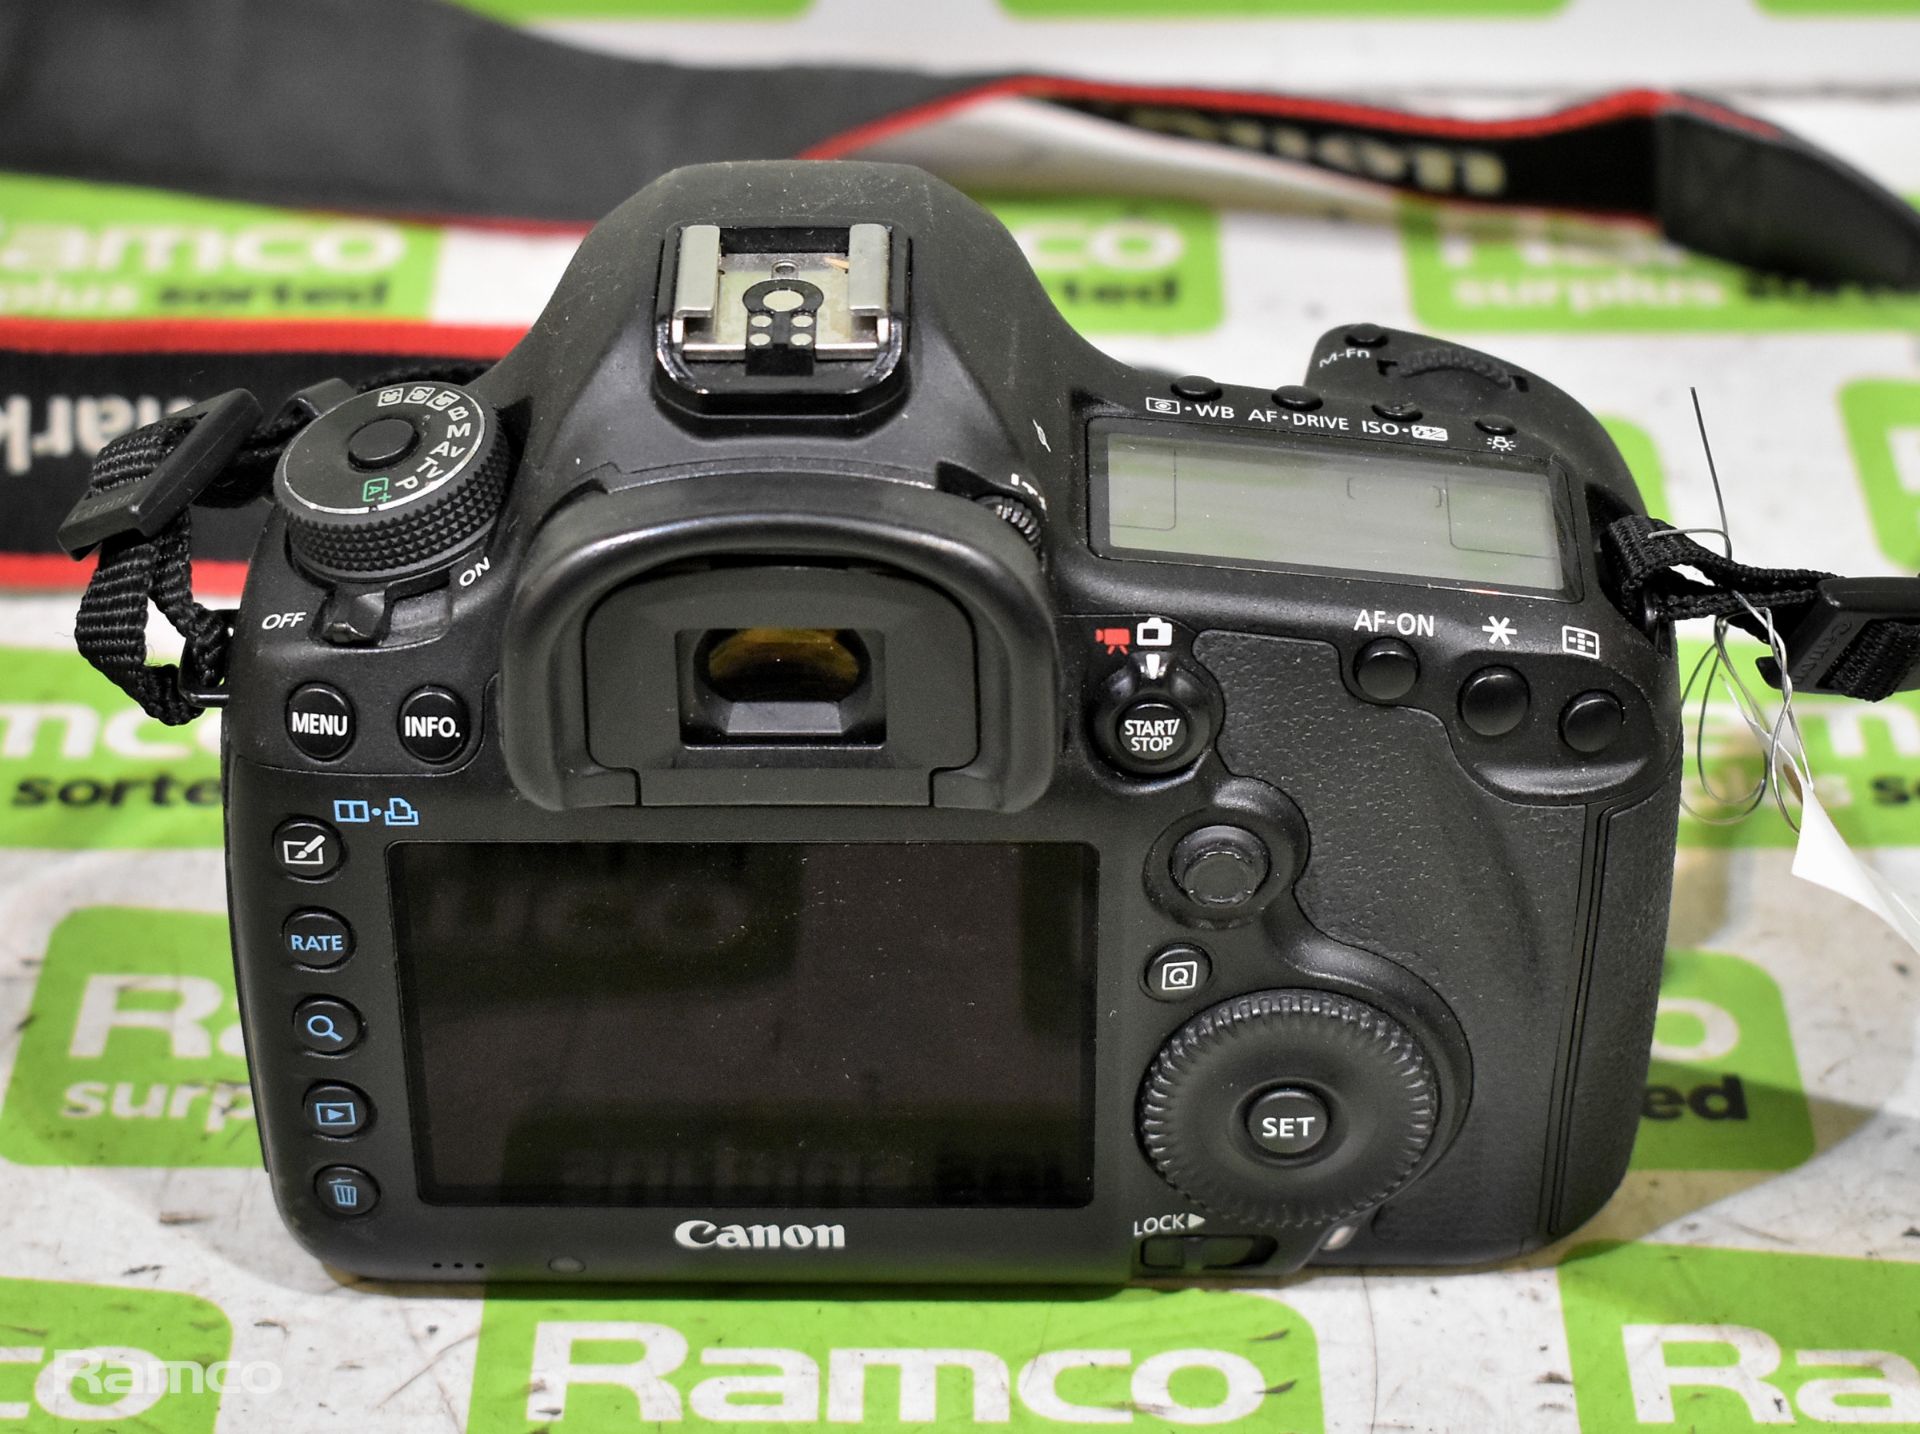 Canon EOS 5D Mark lll DSLR camera (no battery) - Image 5 of 9